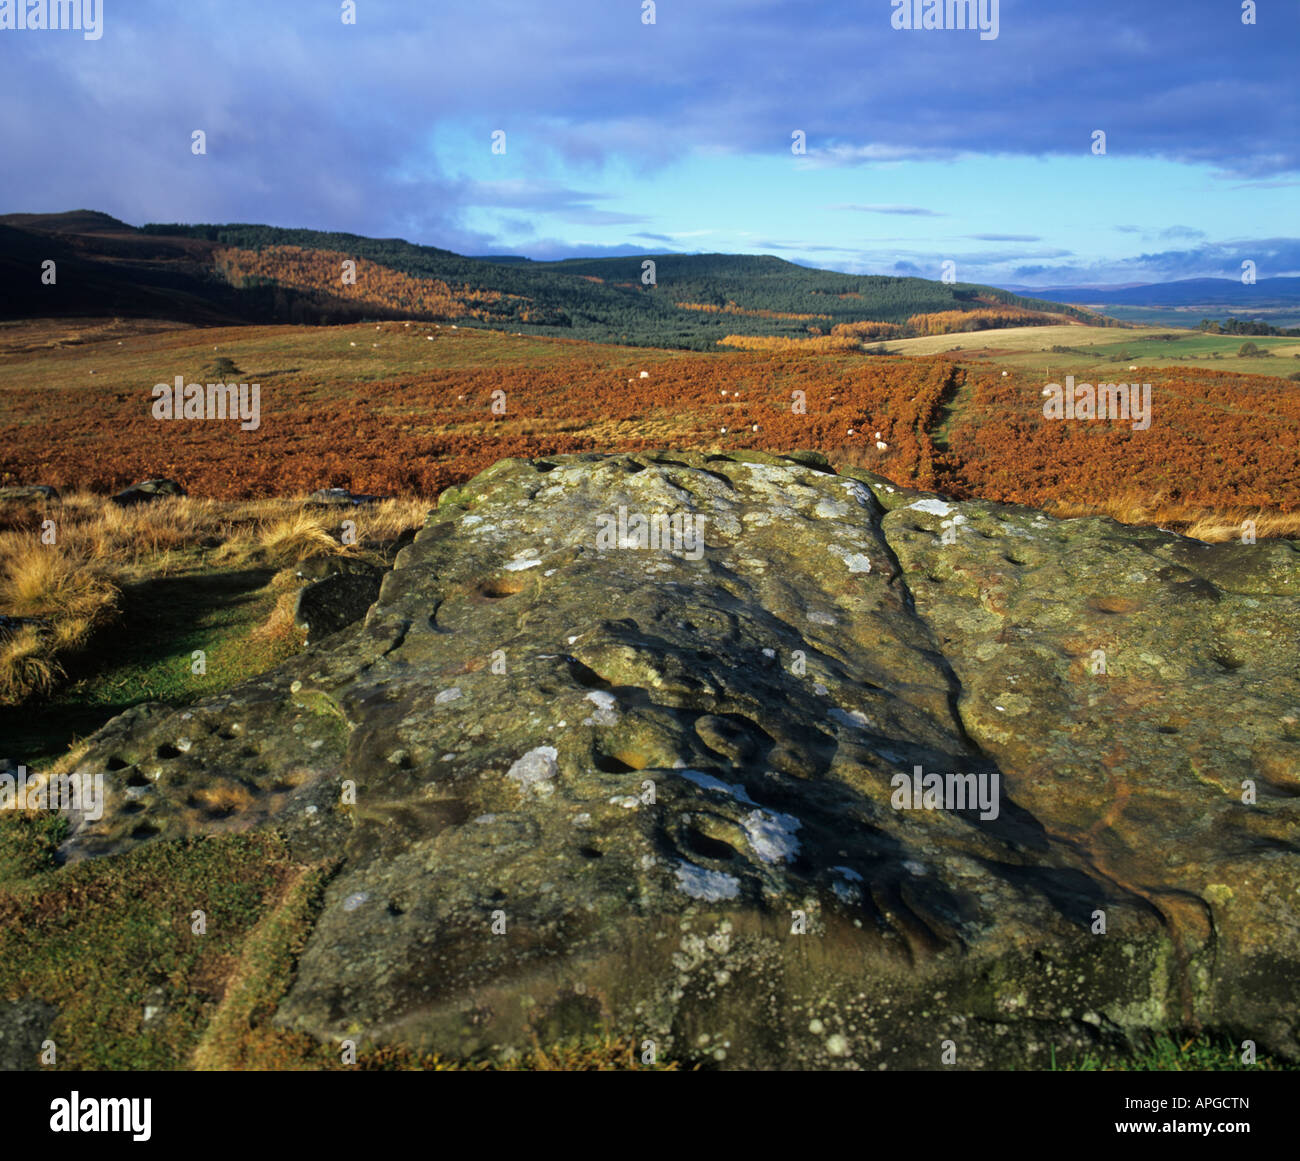 Neolithic cup and ring marked rock at Lordenshaws, the Simonside Hills,  near Rothbury, Northumberland National Park, England Stock Photo